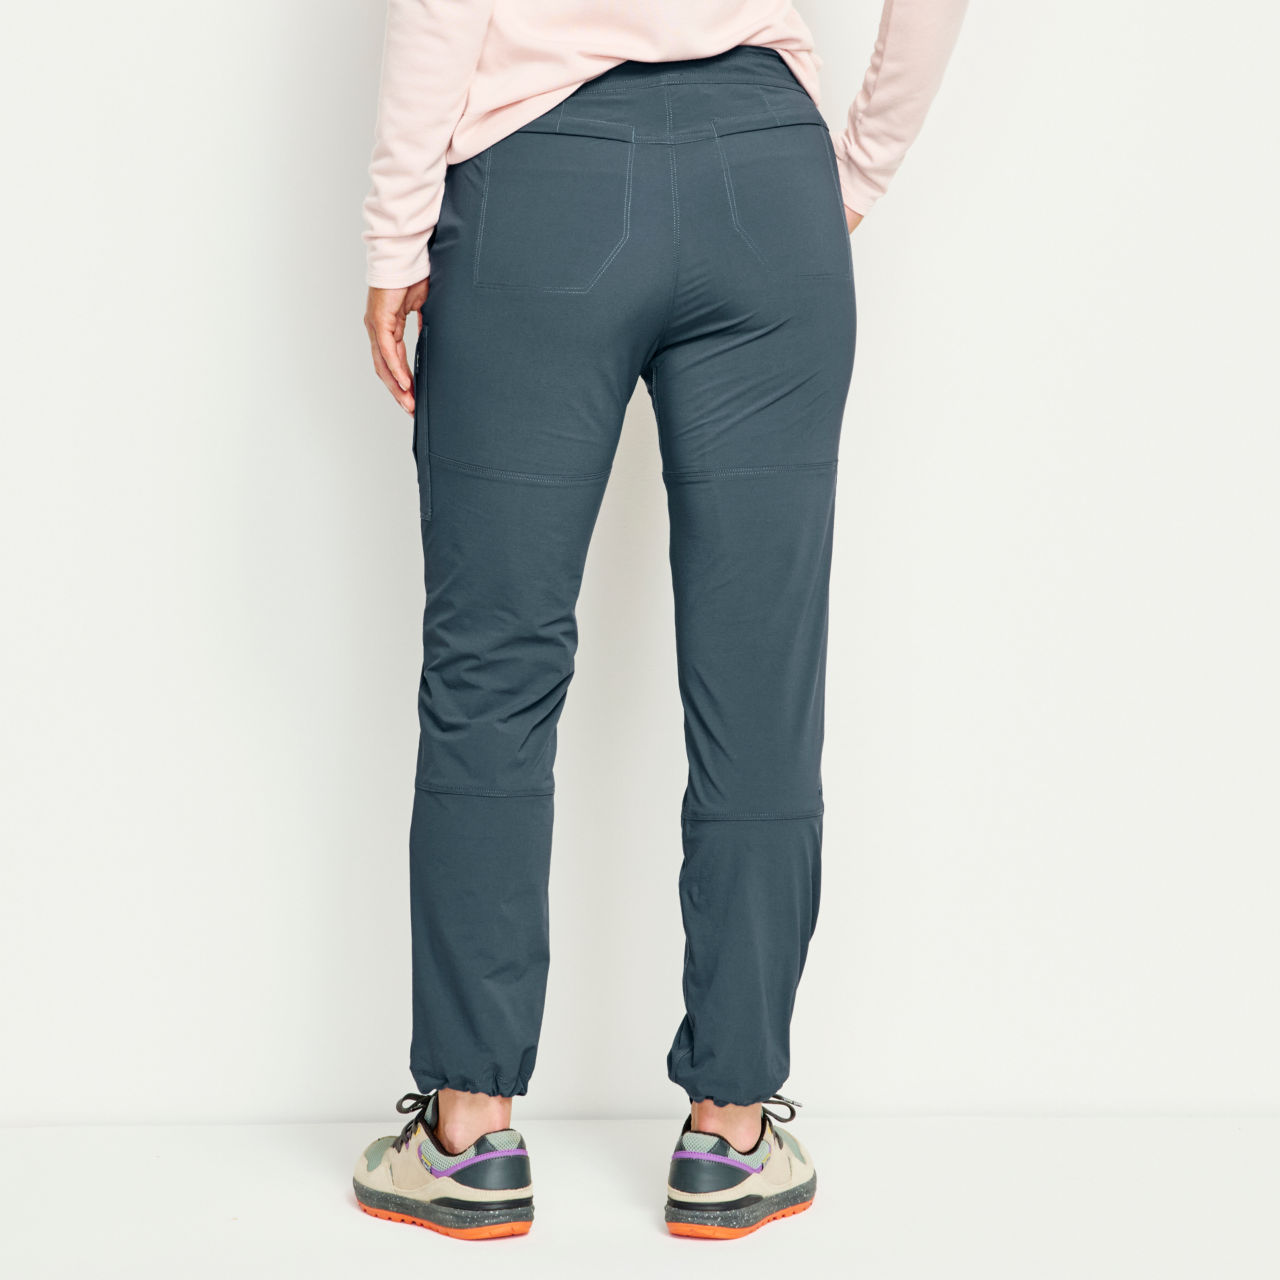 Jackson Quick-Dry Lined Natural Fit Straight-Leg Pants -  image number 3